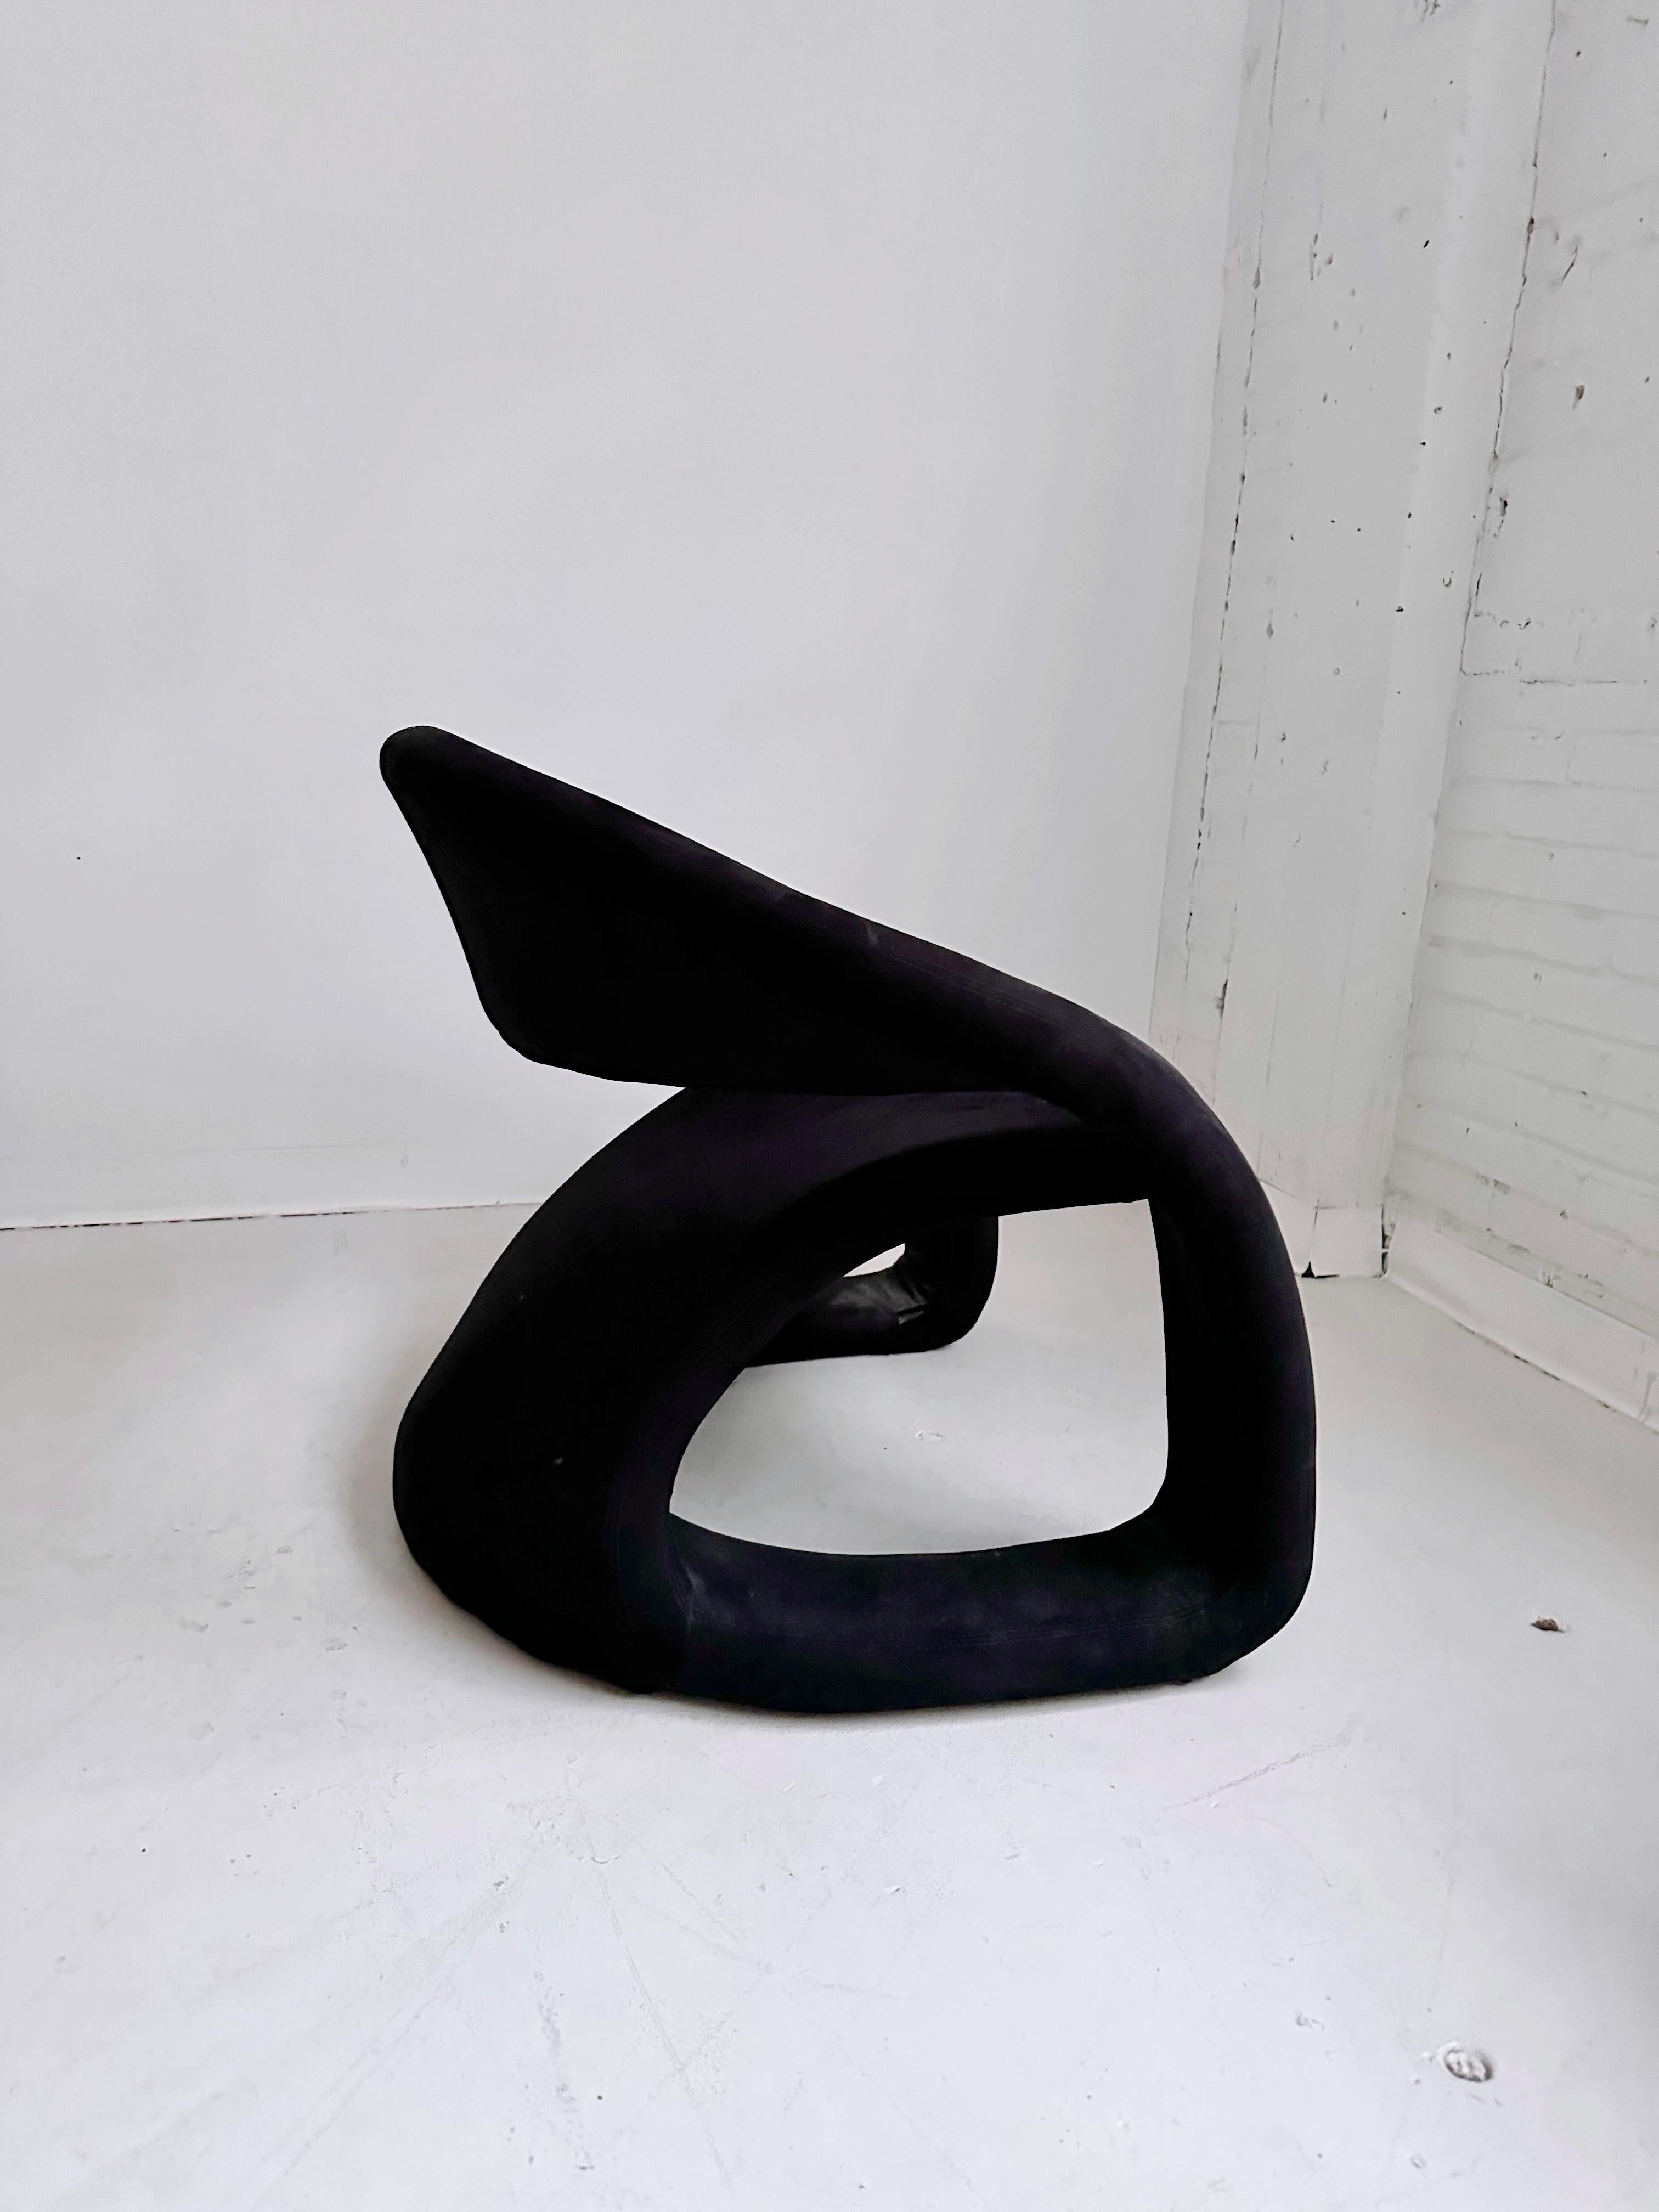 Vintage Black Velour cantilevered tongue chair by Jaymar, in the style of Louis Durot

Dimensions:
35”W x 28”D x 29”H seat height 17.5